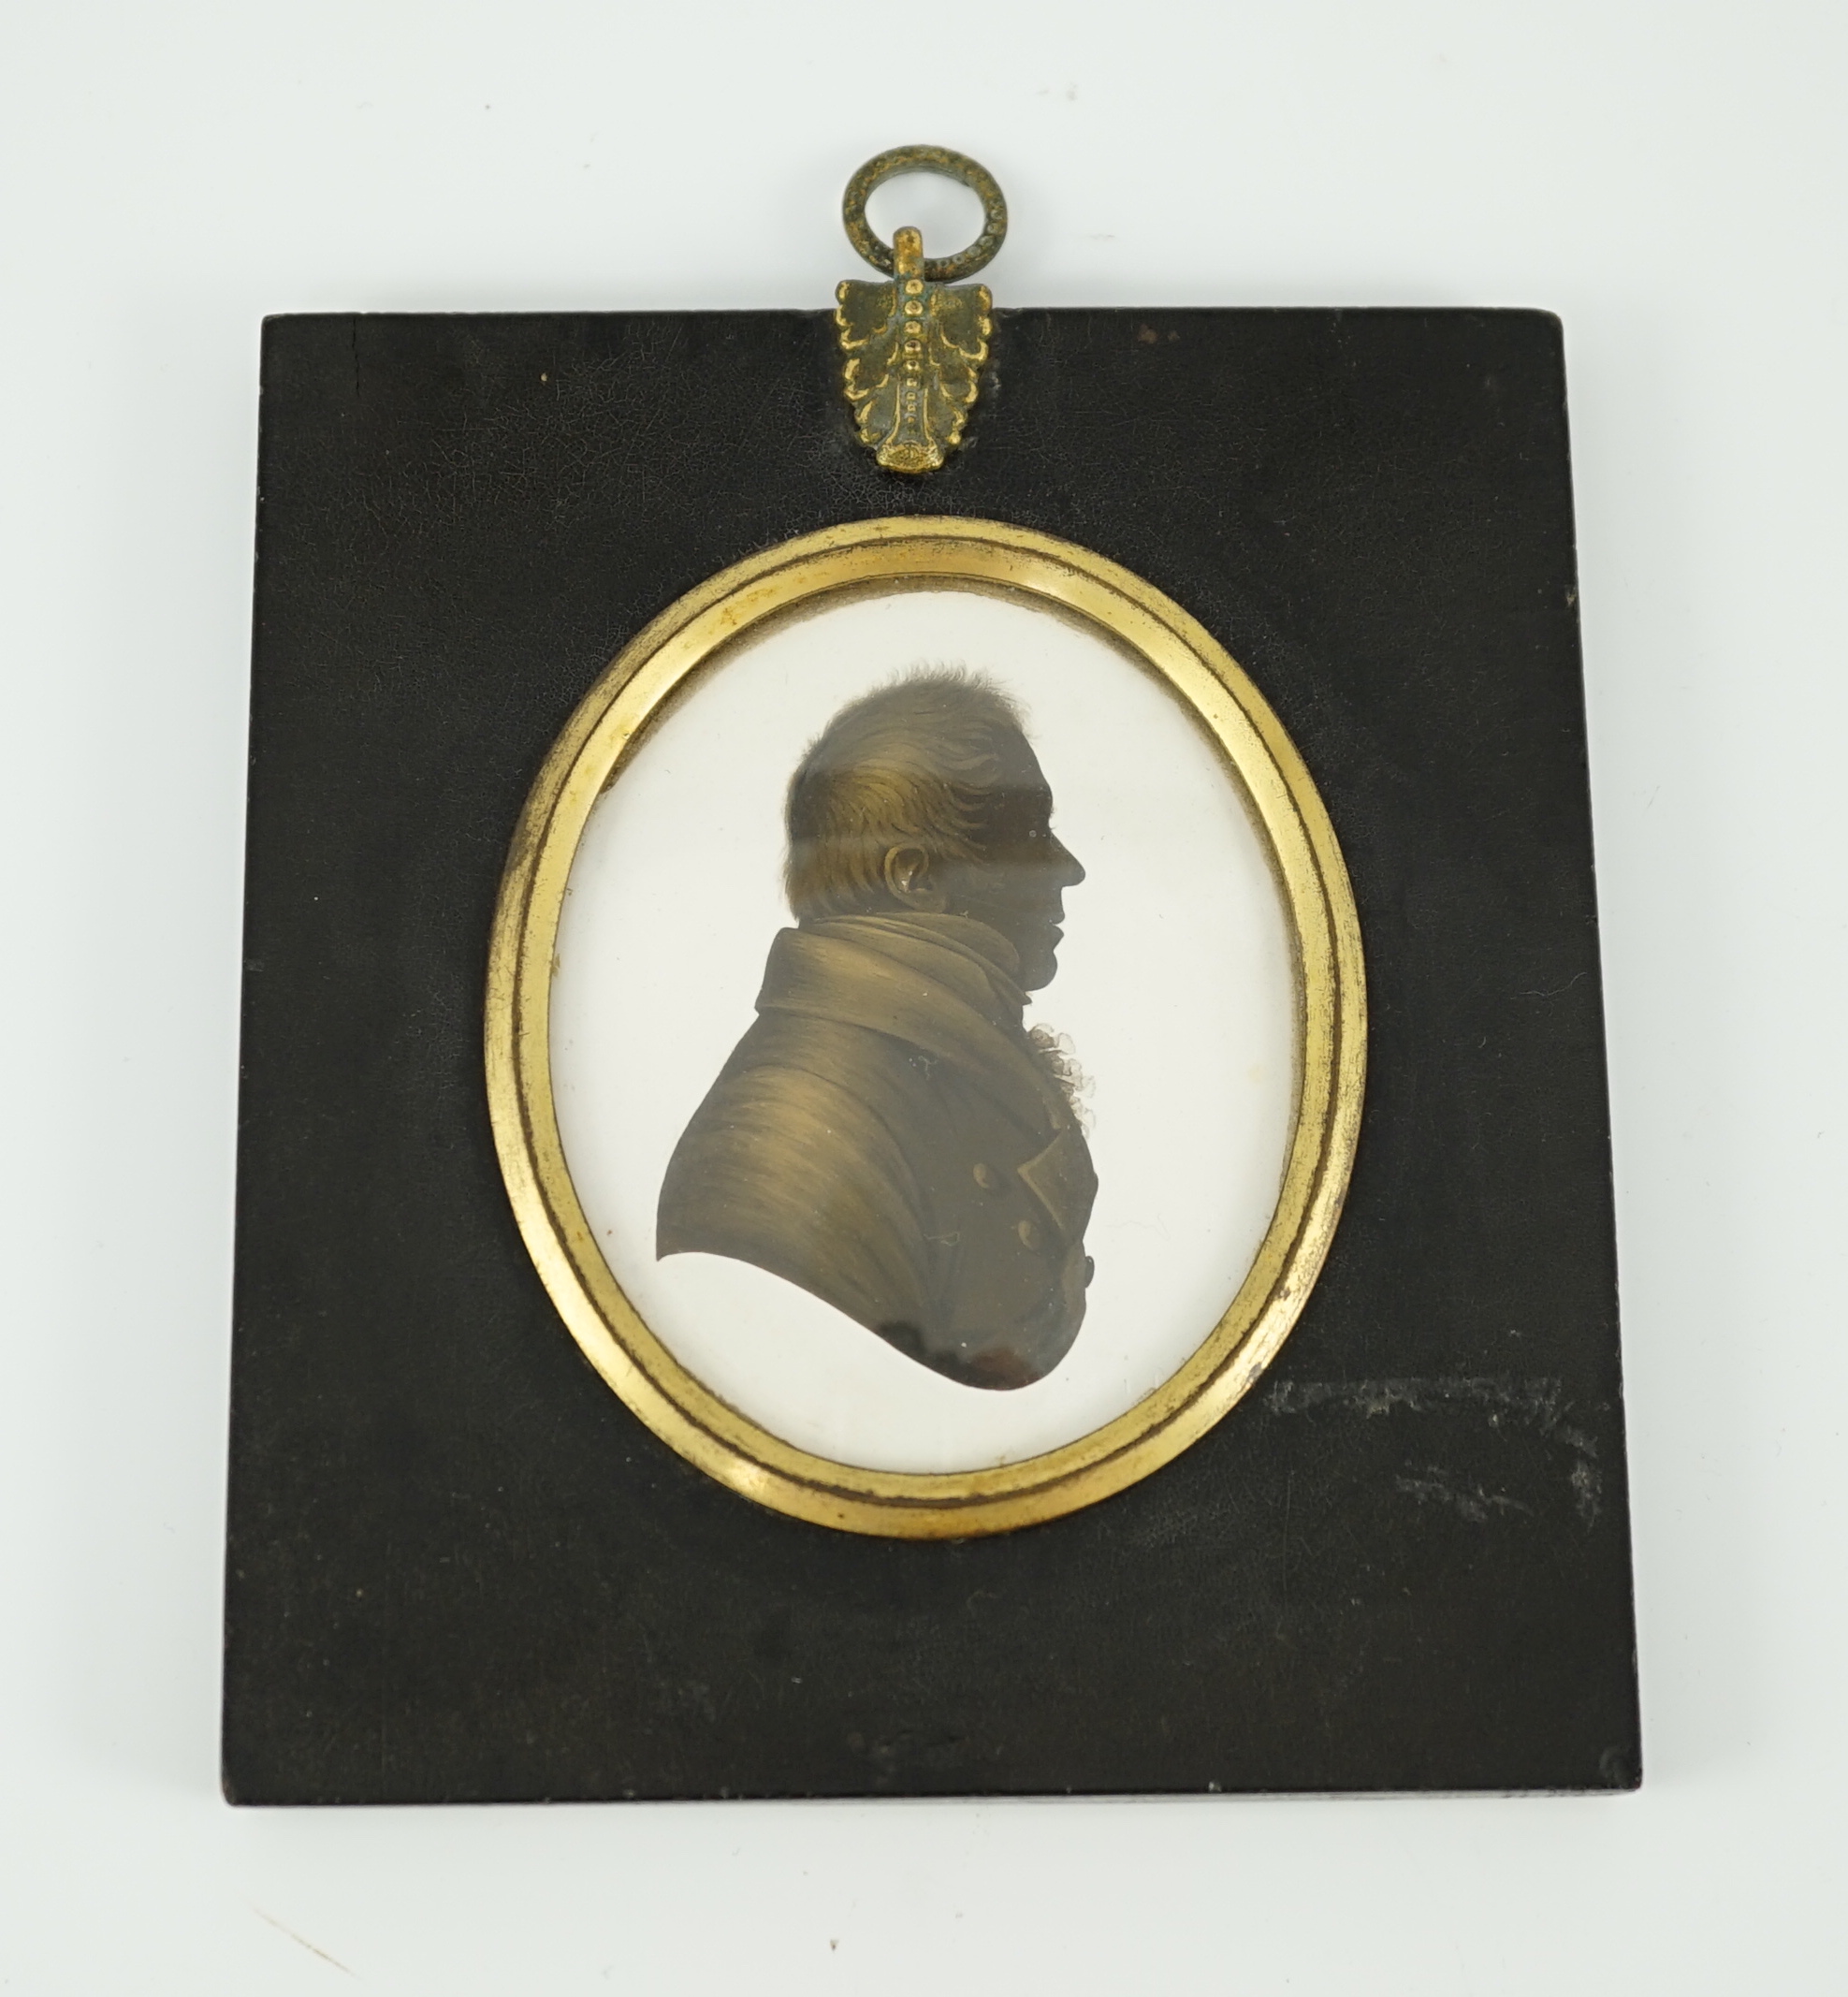 John Miers (1756-1821), Silhouette of a gentleman, painted and bronzed plaster, 7.9 x 6.5cm.